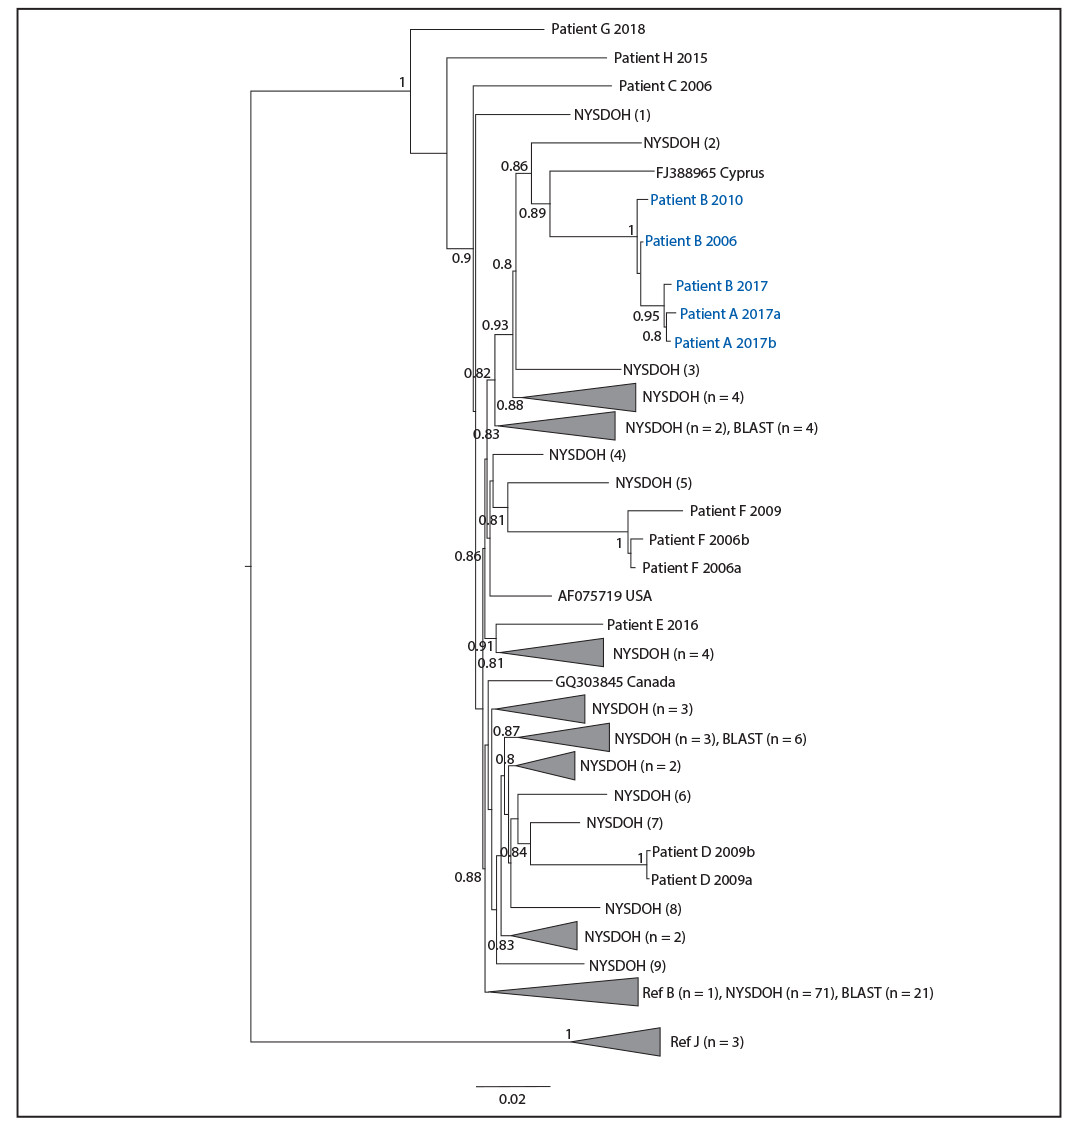 The figure is a phylogenetic tree showing high confidence that HIV sequences for patients A and B were related, indicating presumptive health care–associated transmission.